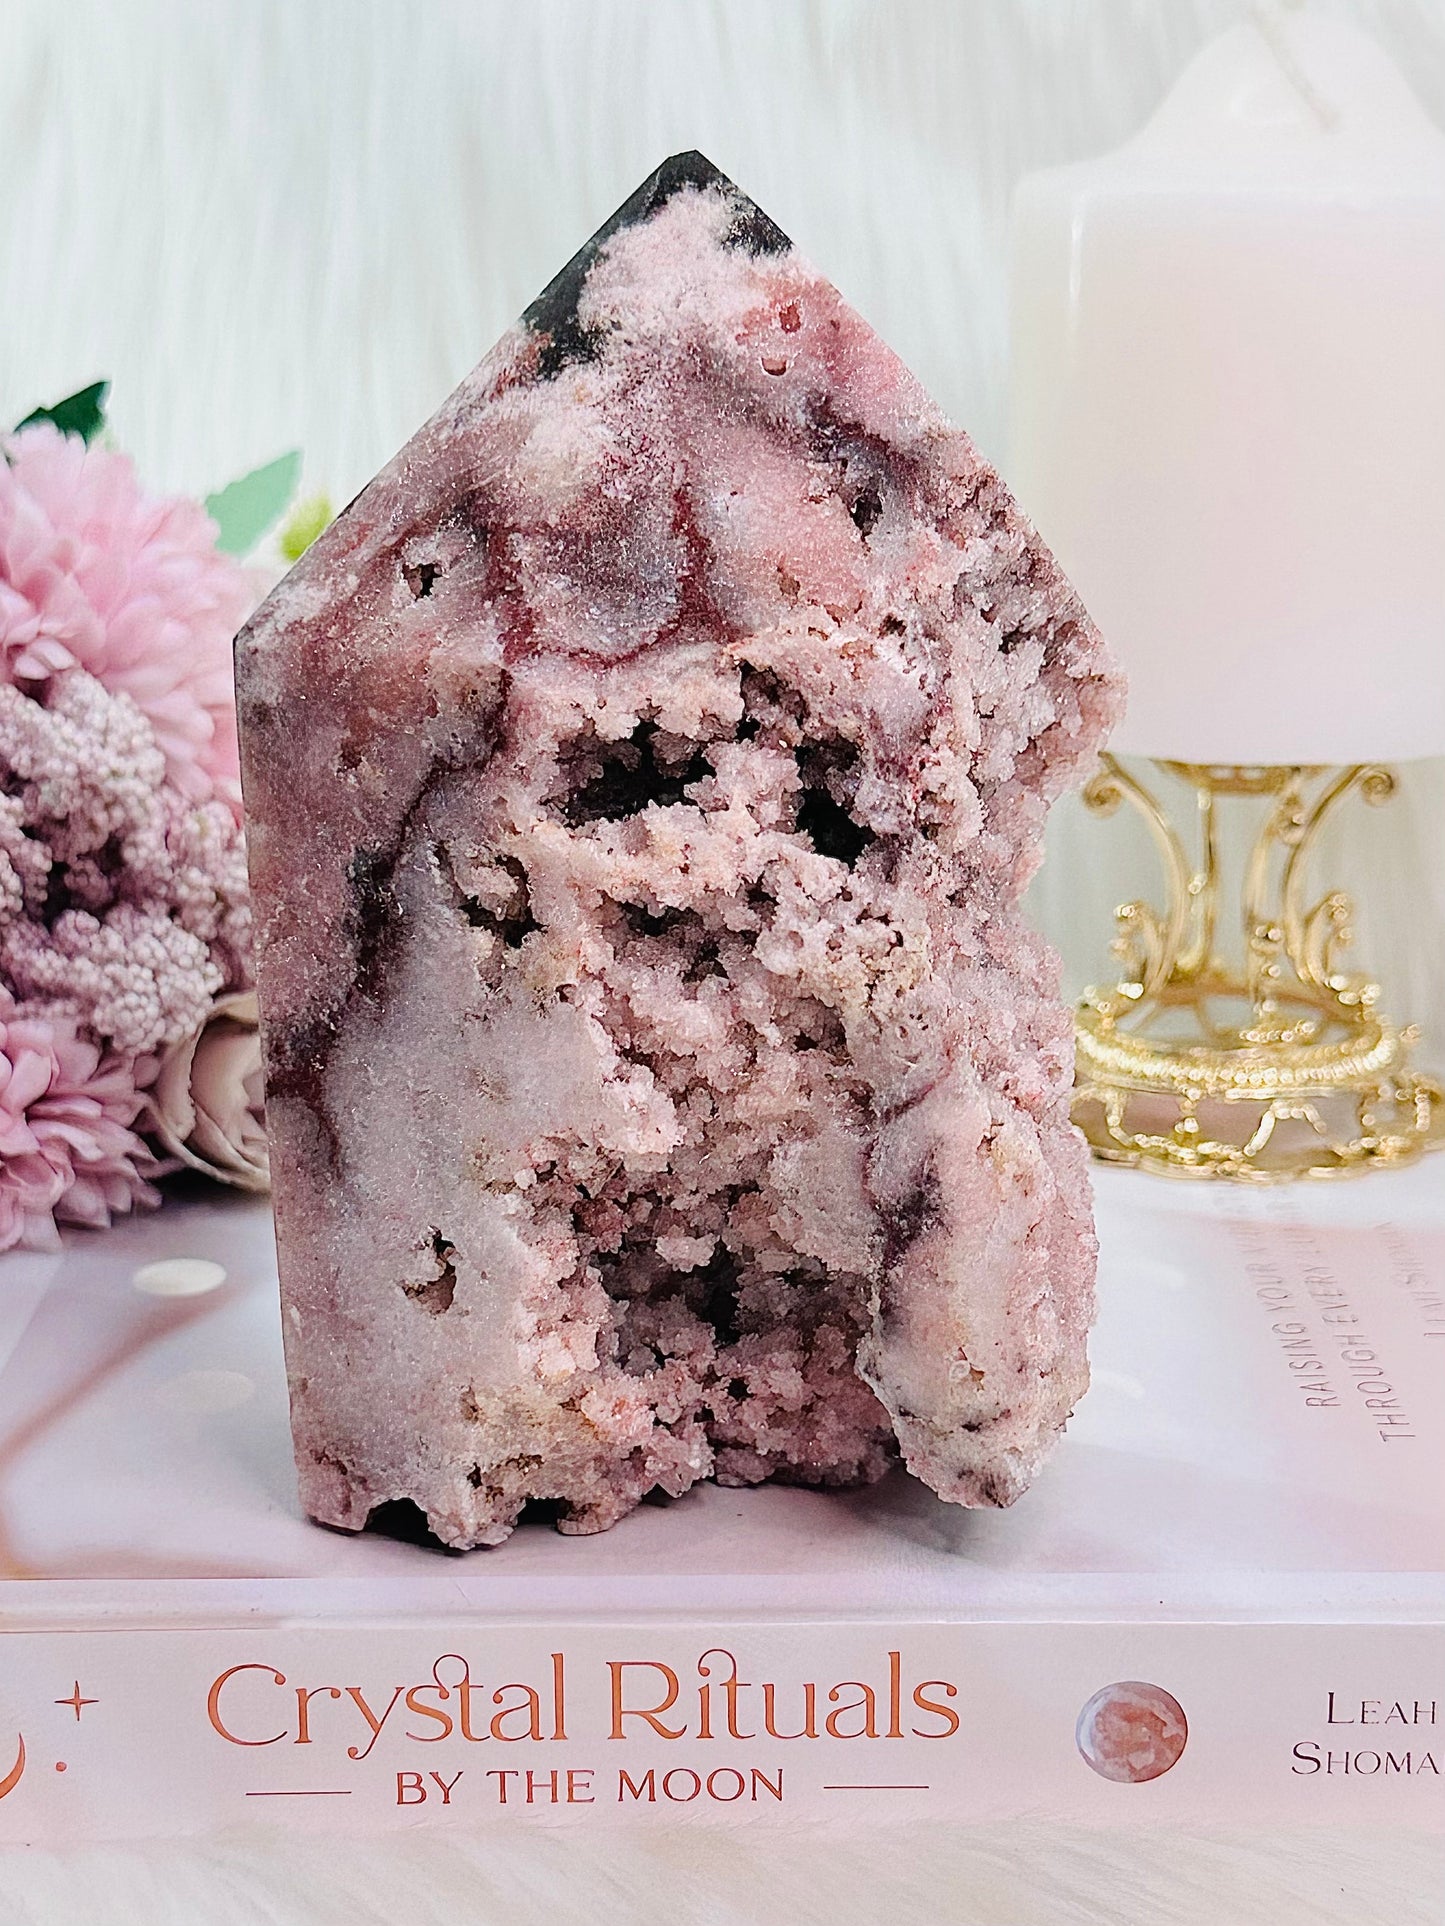 The Ultimate Beauty!!! Divine Large 1.16KG Druzy Pink Amethyst Freeform From Uruguay